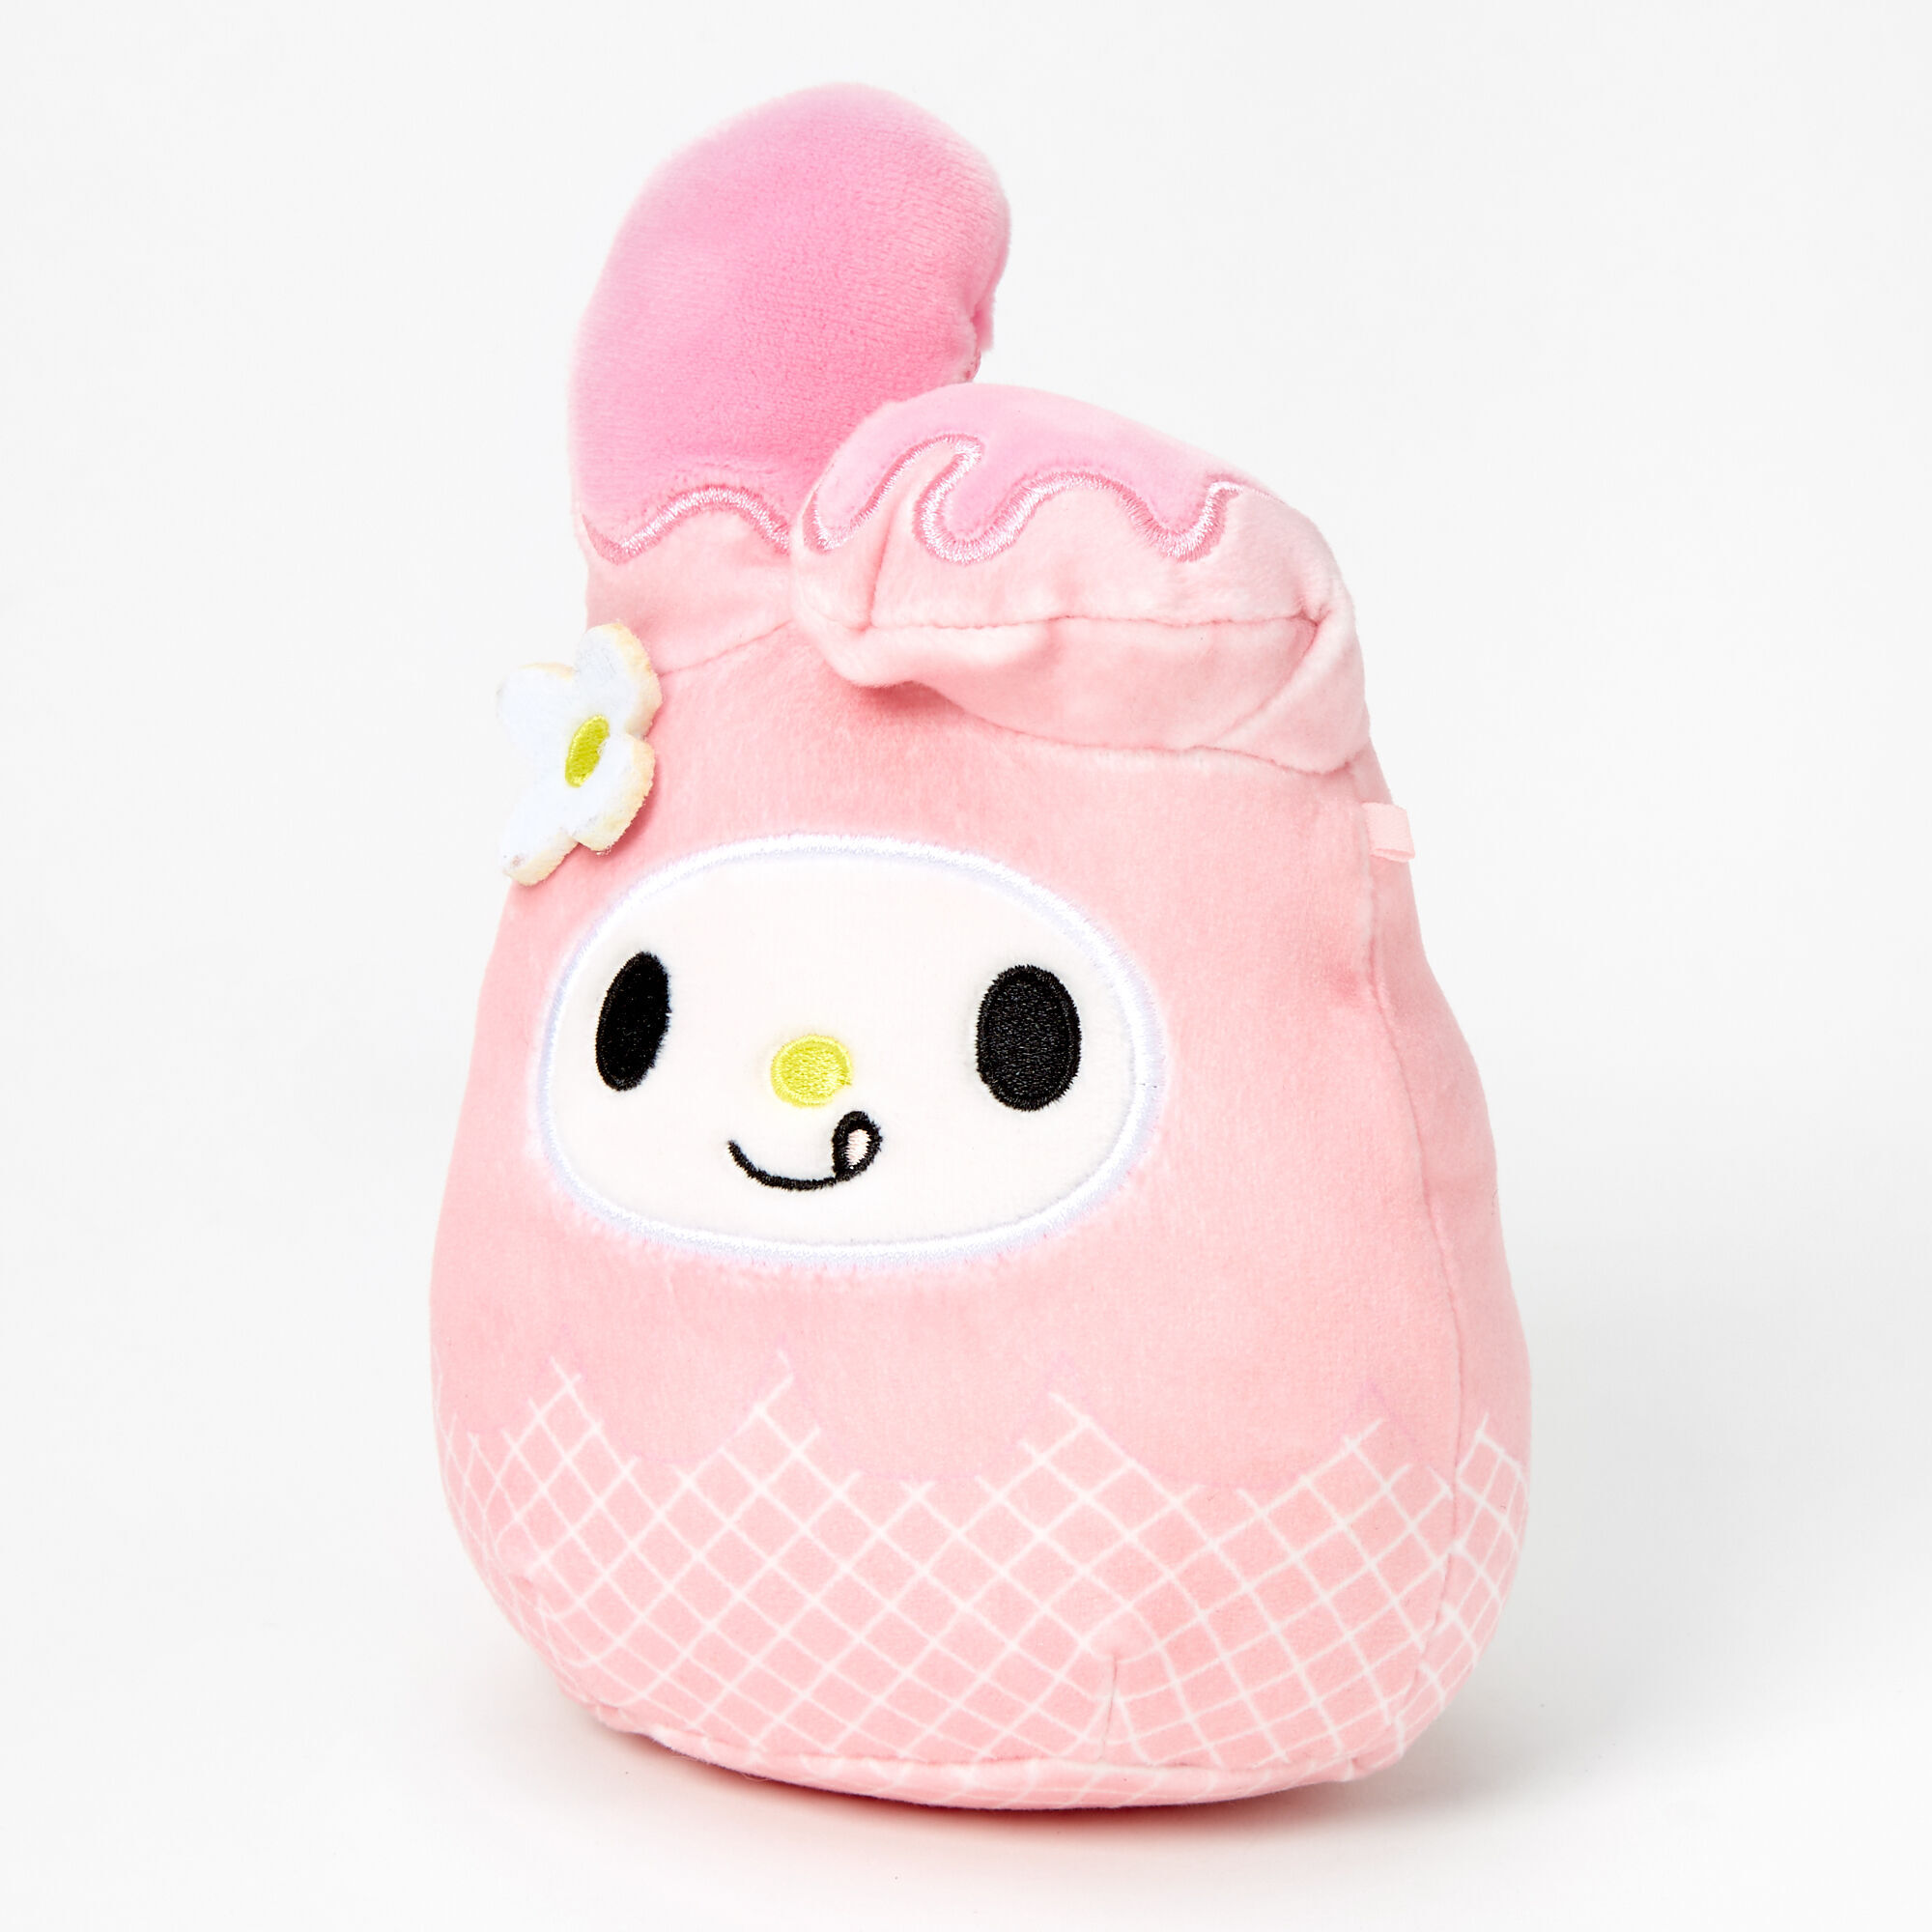 Details about   Sanrio Hello Kitty 5" Squishmallow Claire's Exclusive 